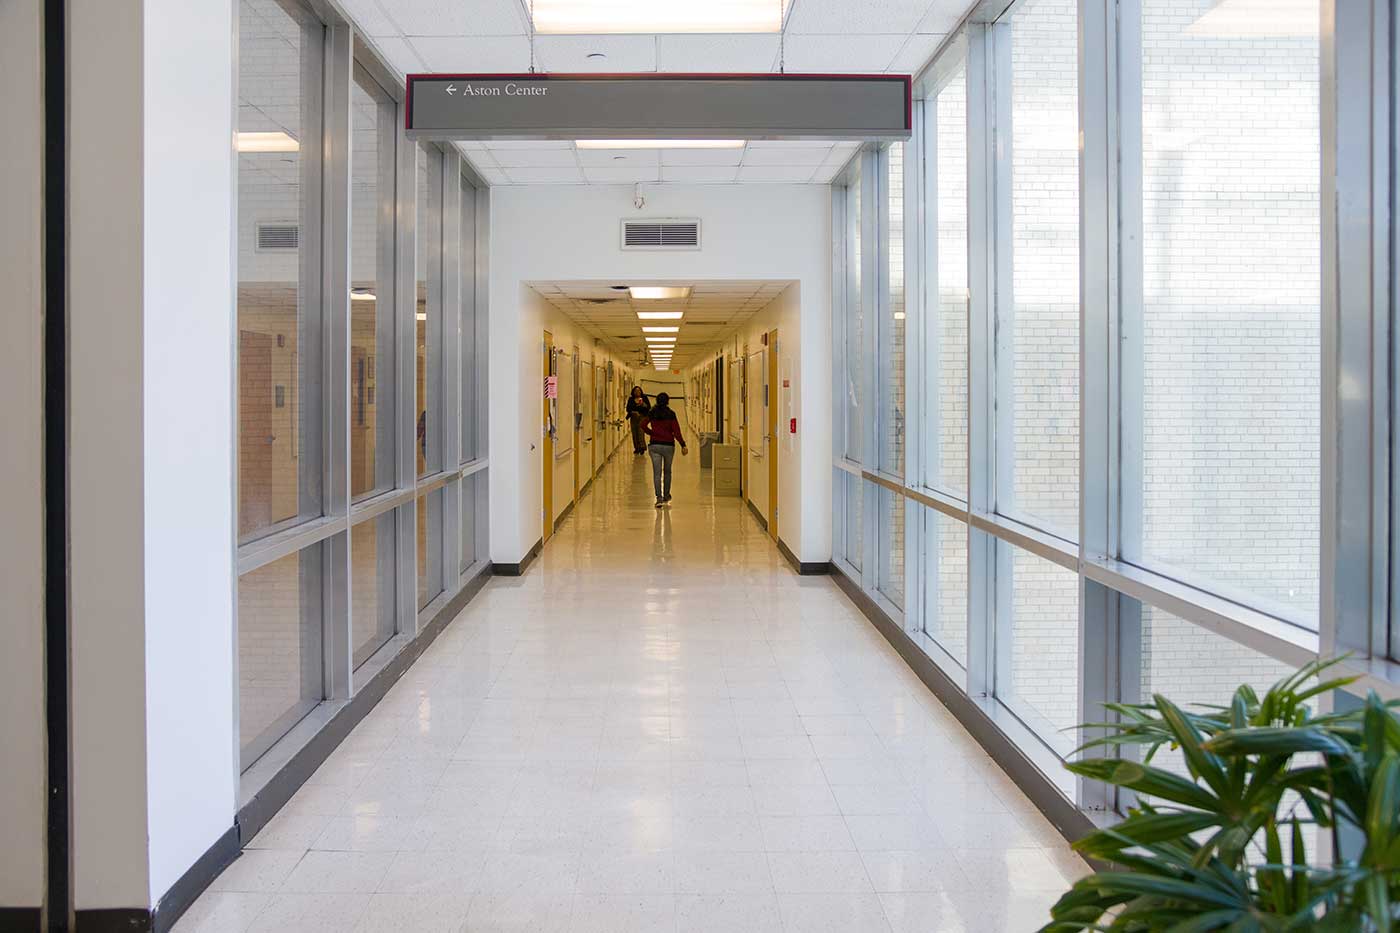 Long hallway with person walking down it, lined by windows